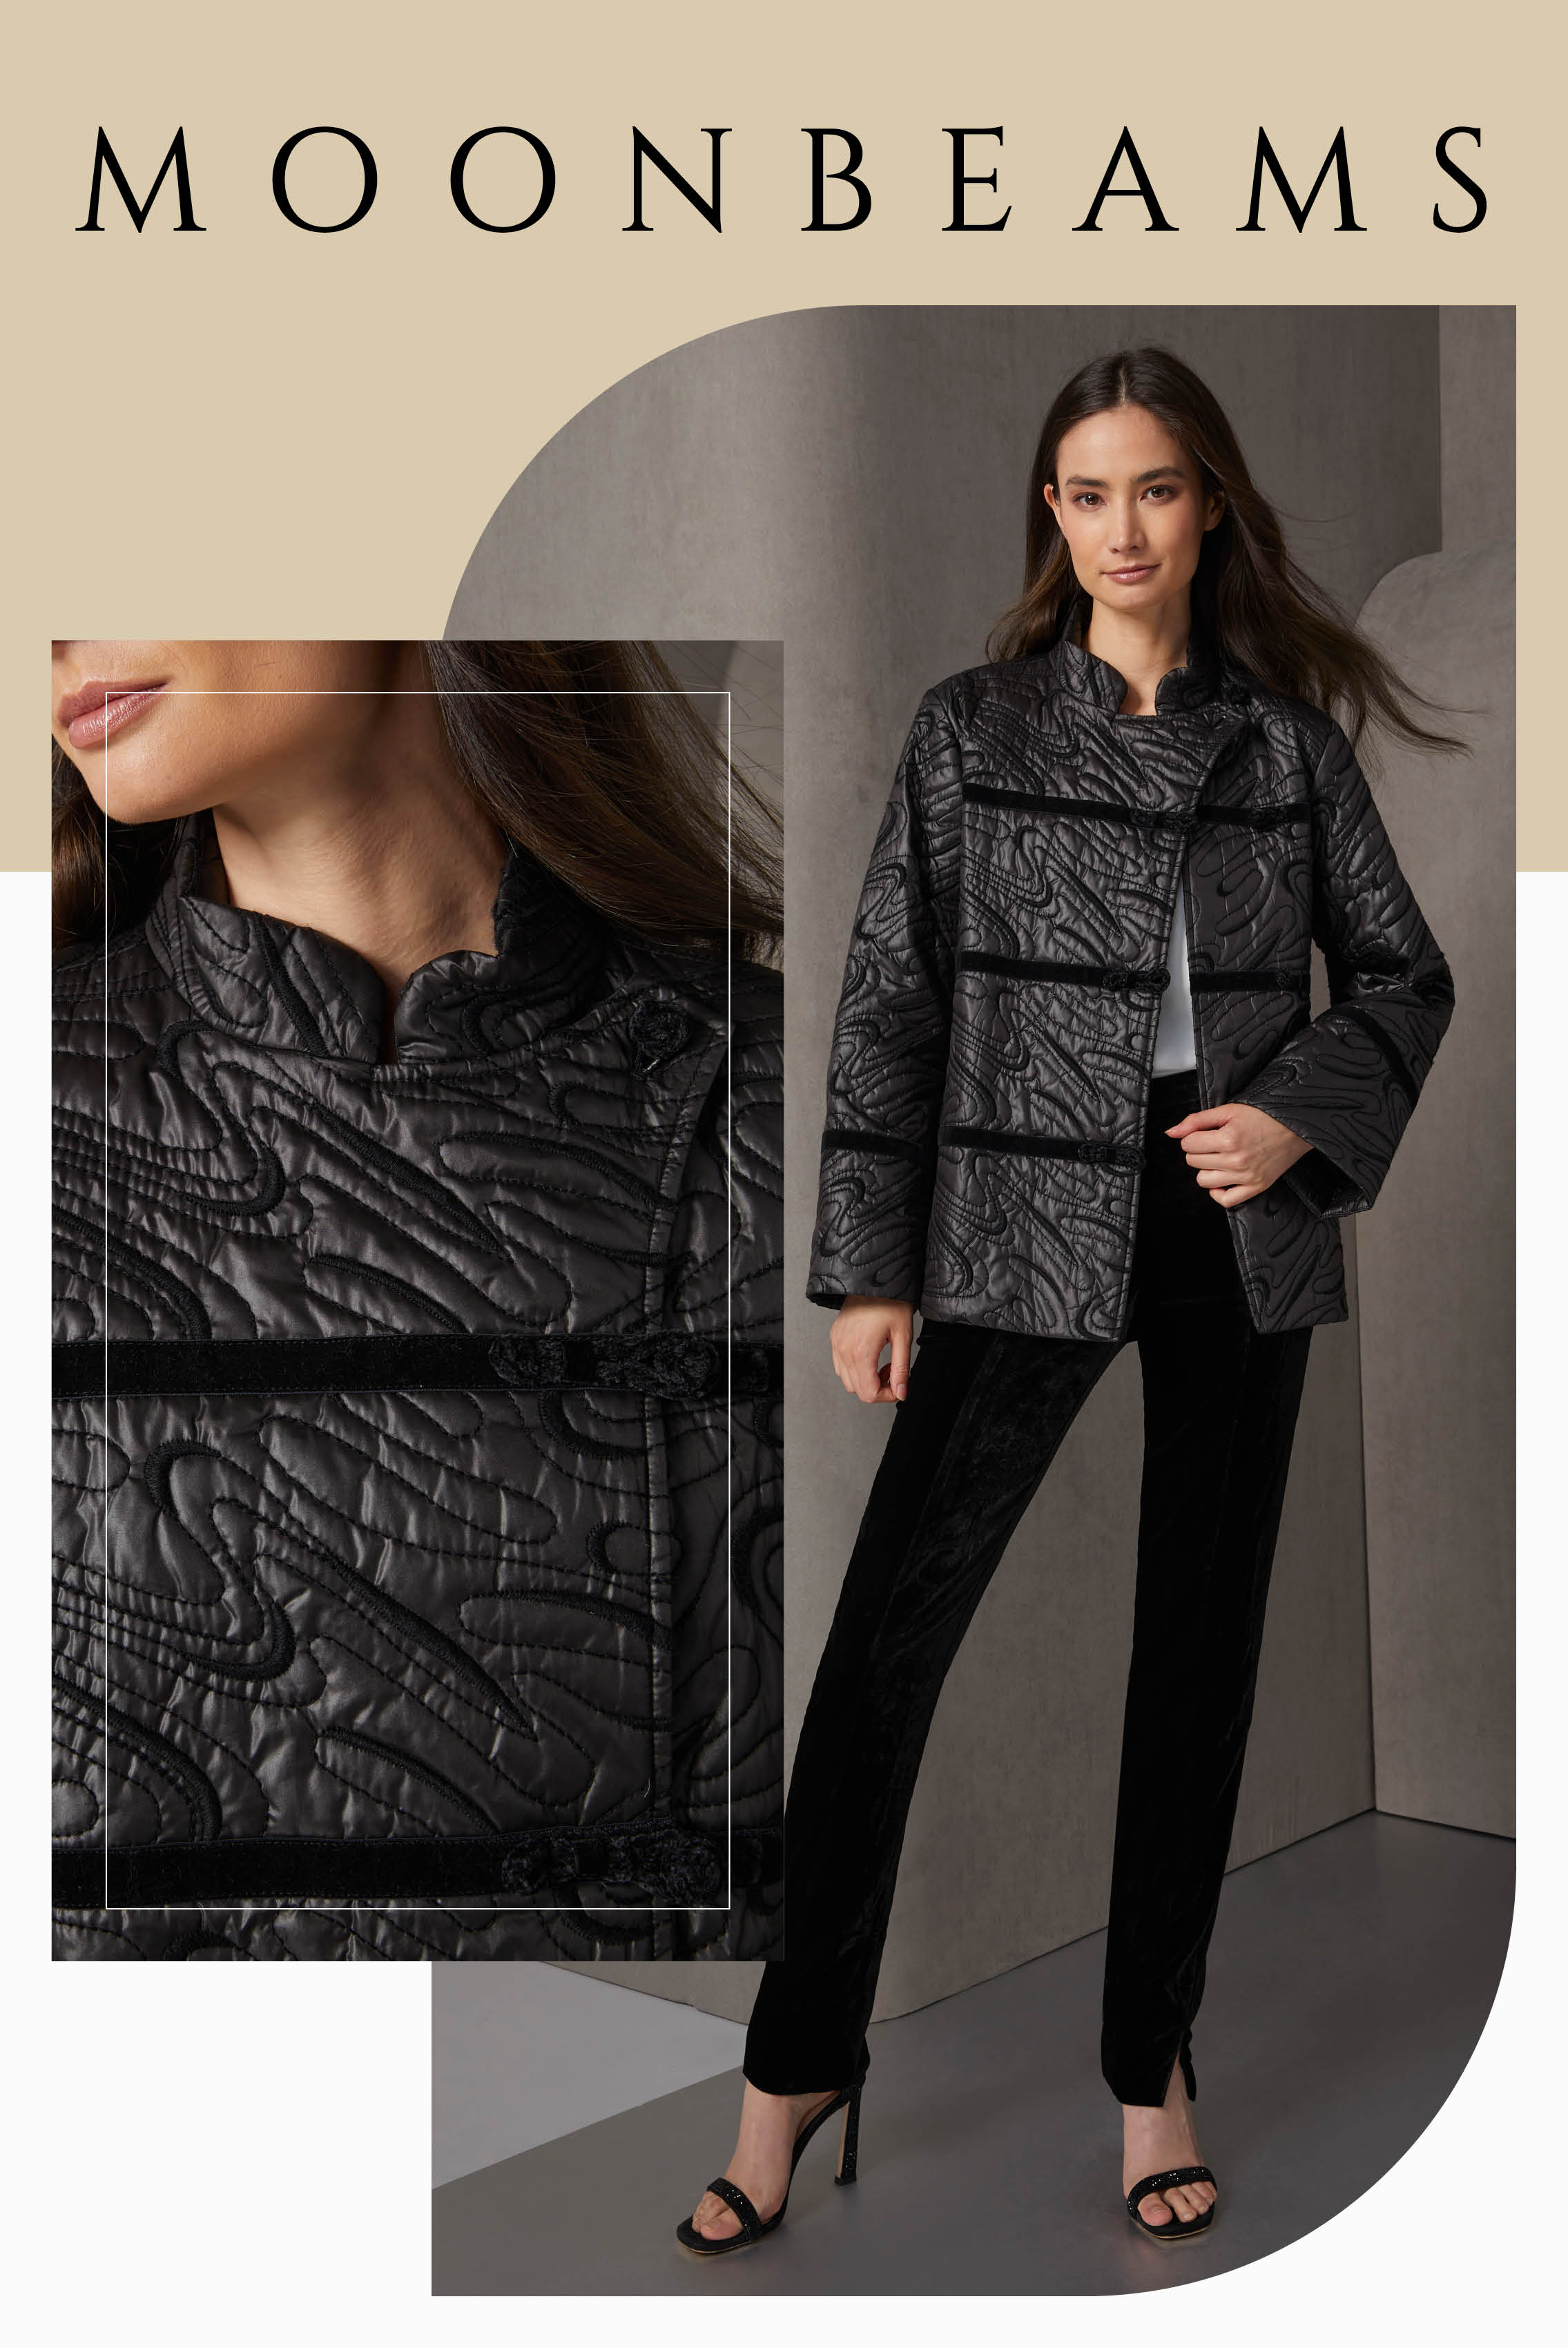 This look is a trend-right column of black with Asian allure in sumptuous materials. The Mandarin jacket features swirling topstitching and embroidery, velvet passementerie, and luxe frog closures. 